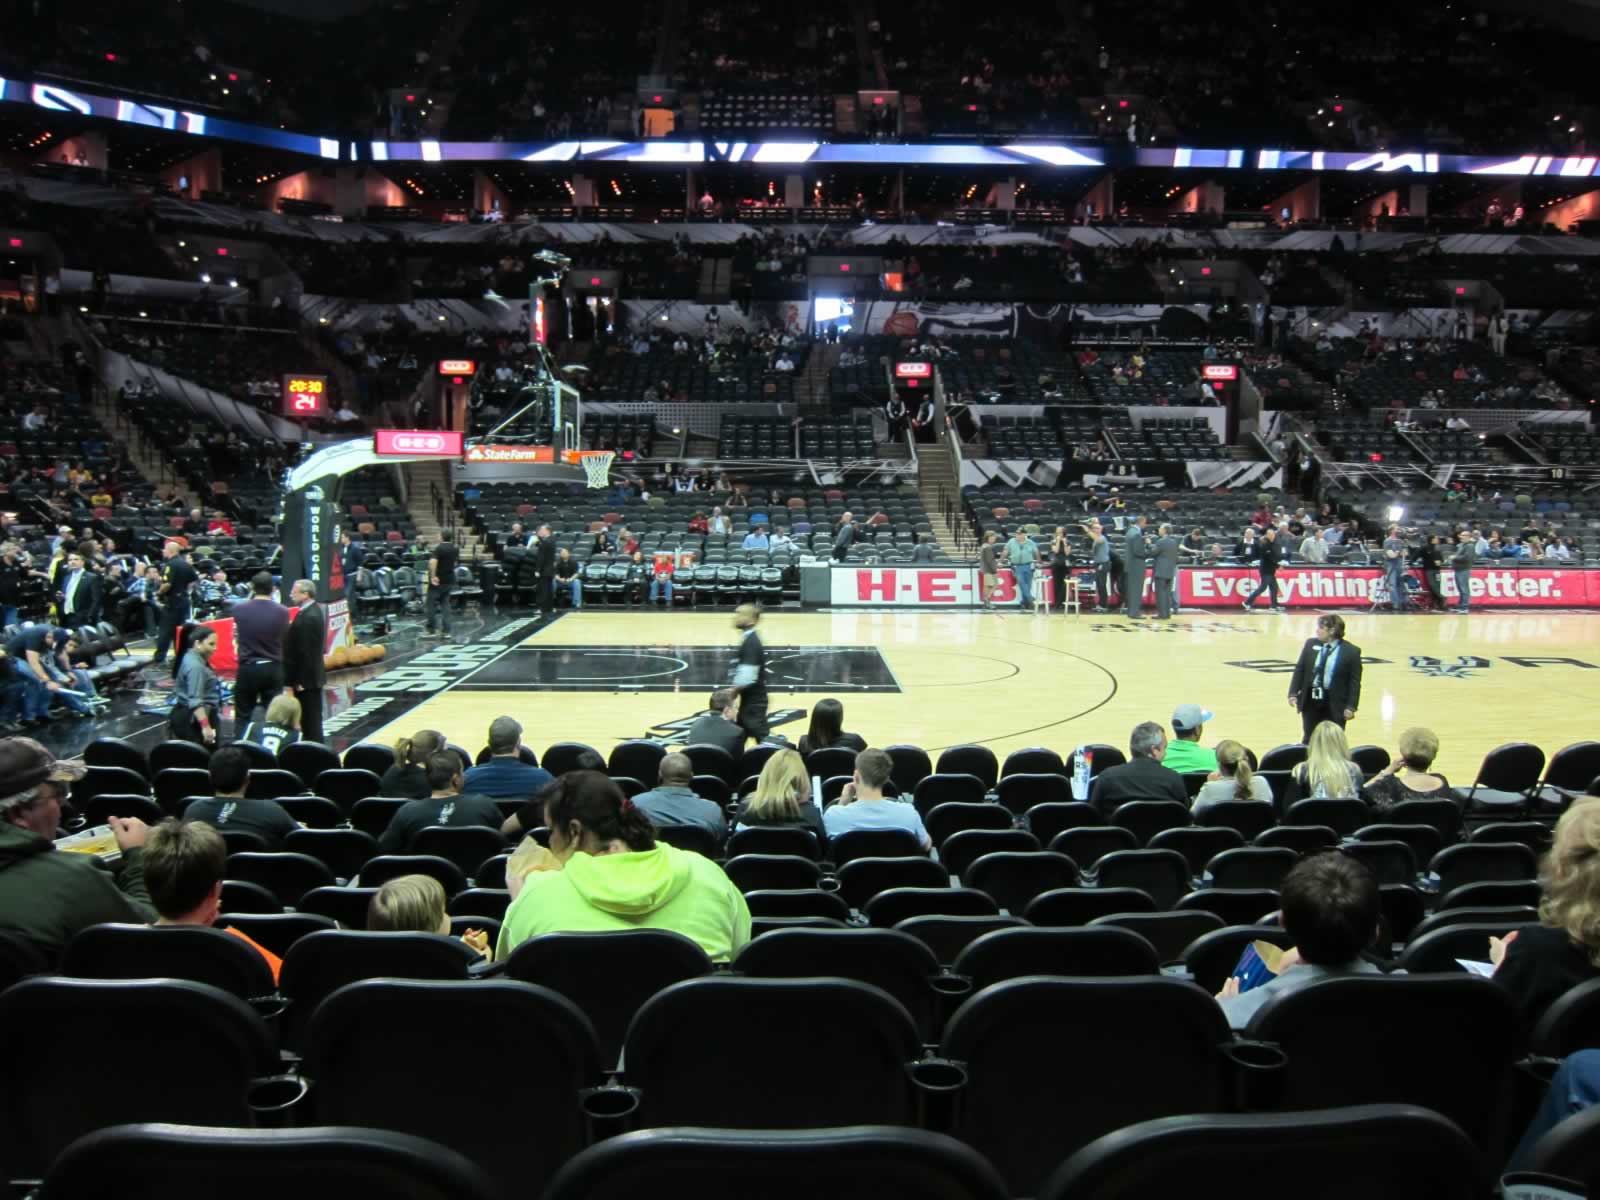 section 24, row 11 seat view  for basketball - at&t center